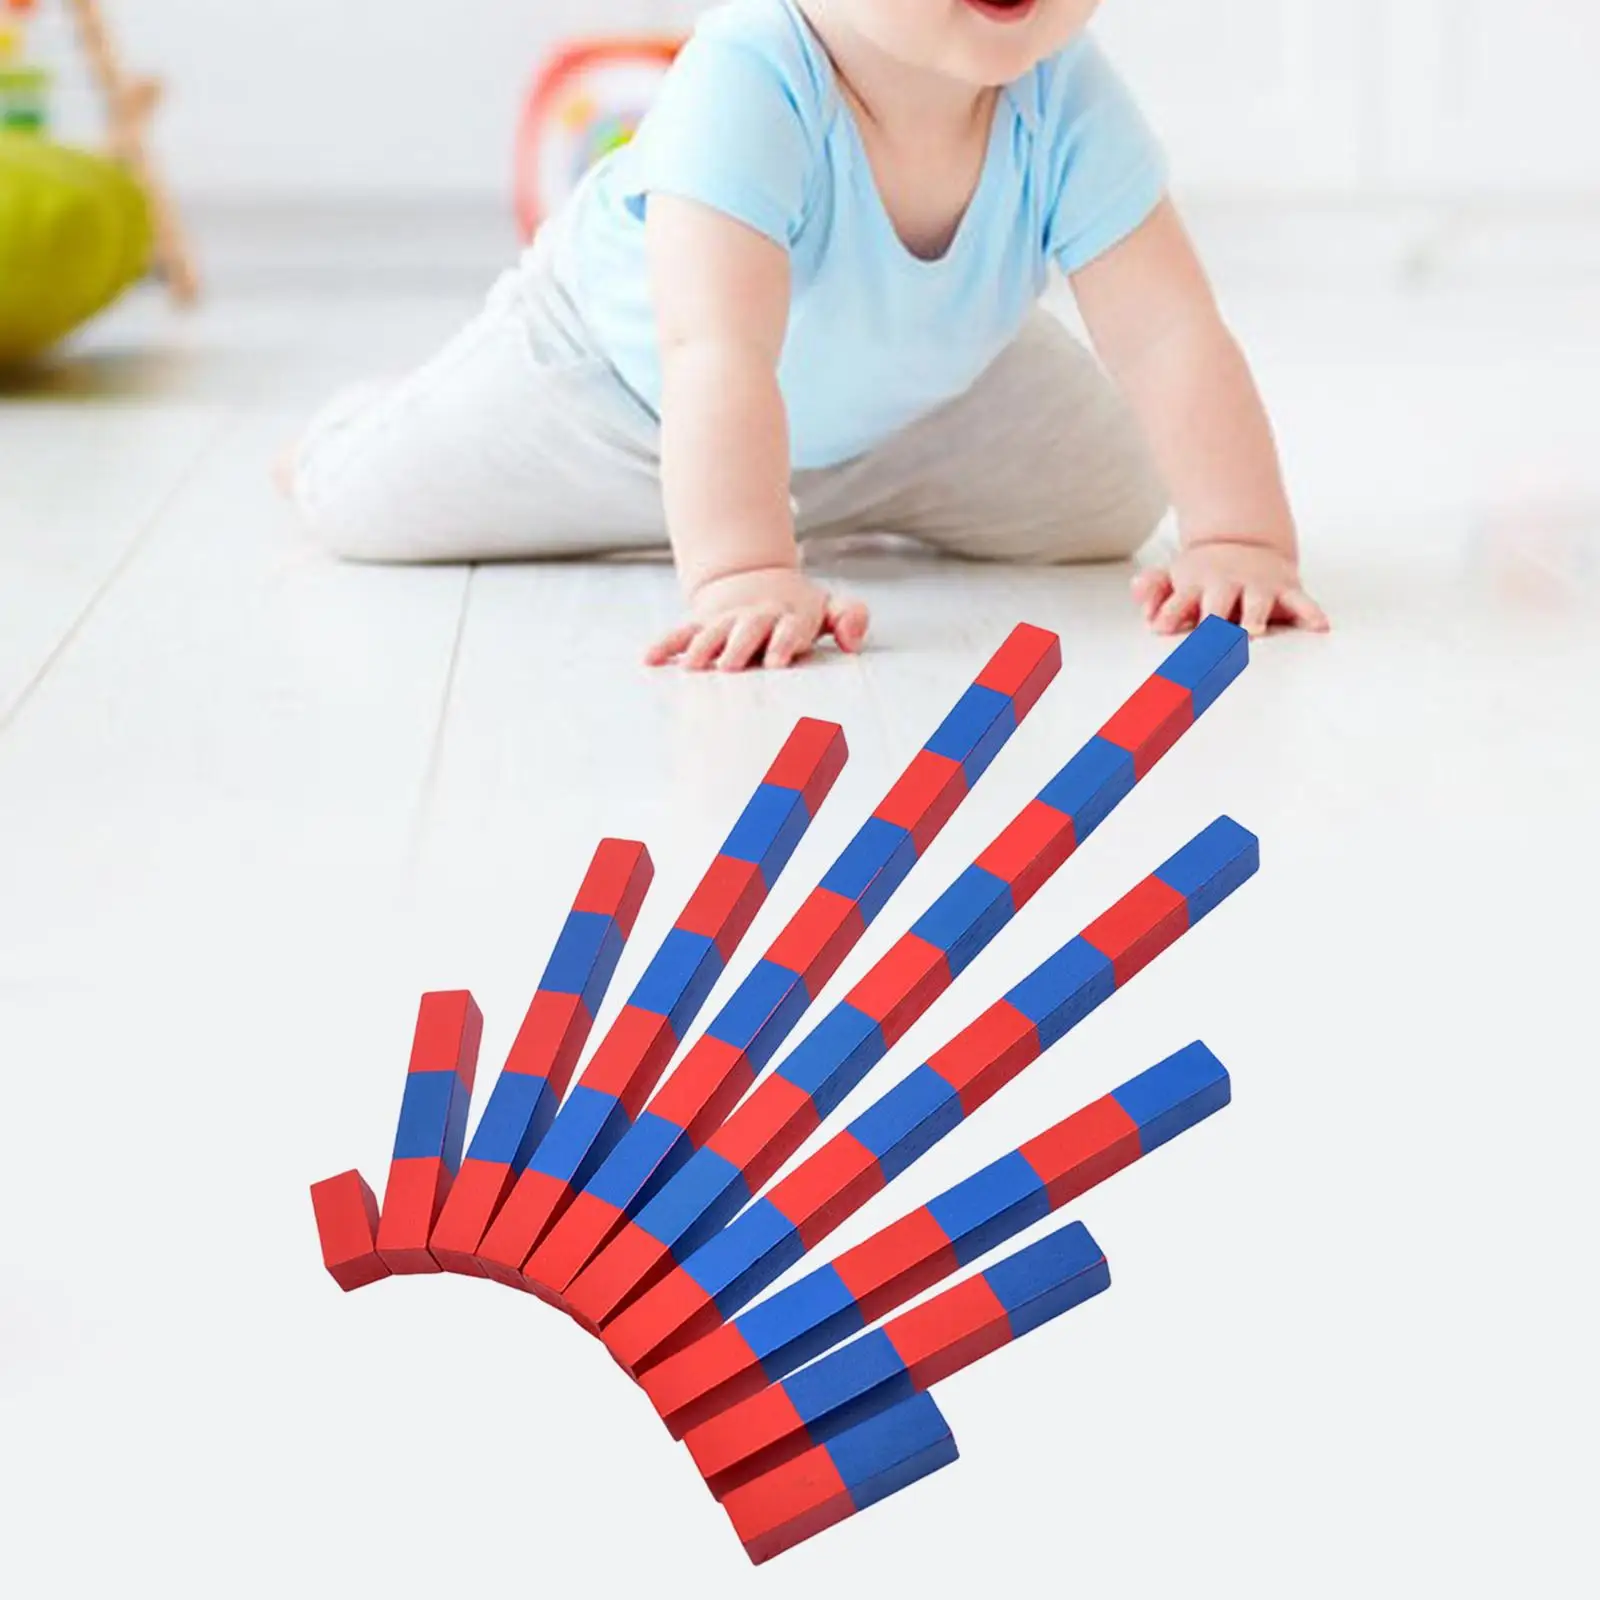 Montessori Red Blue Number Rods Counting Rods Visual Experience Portable for Toddlers